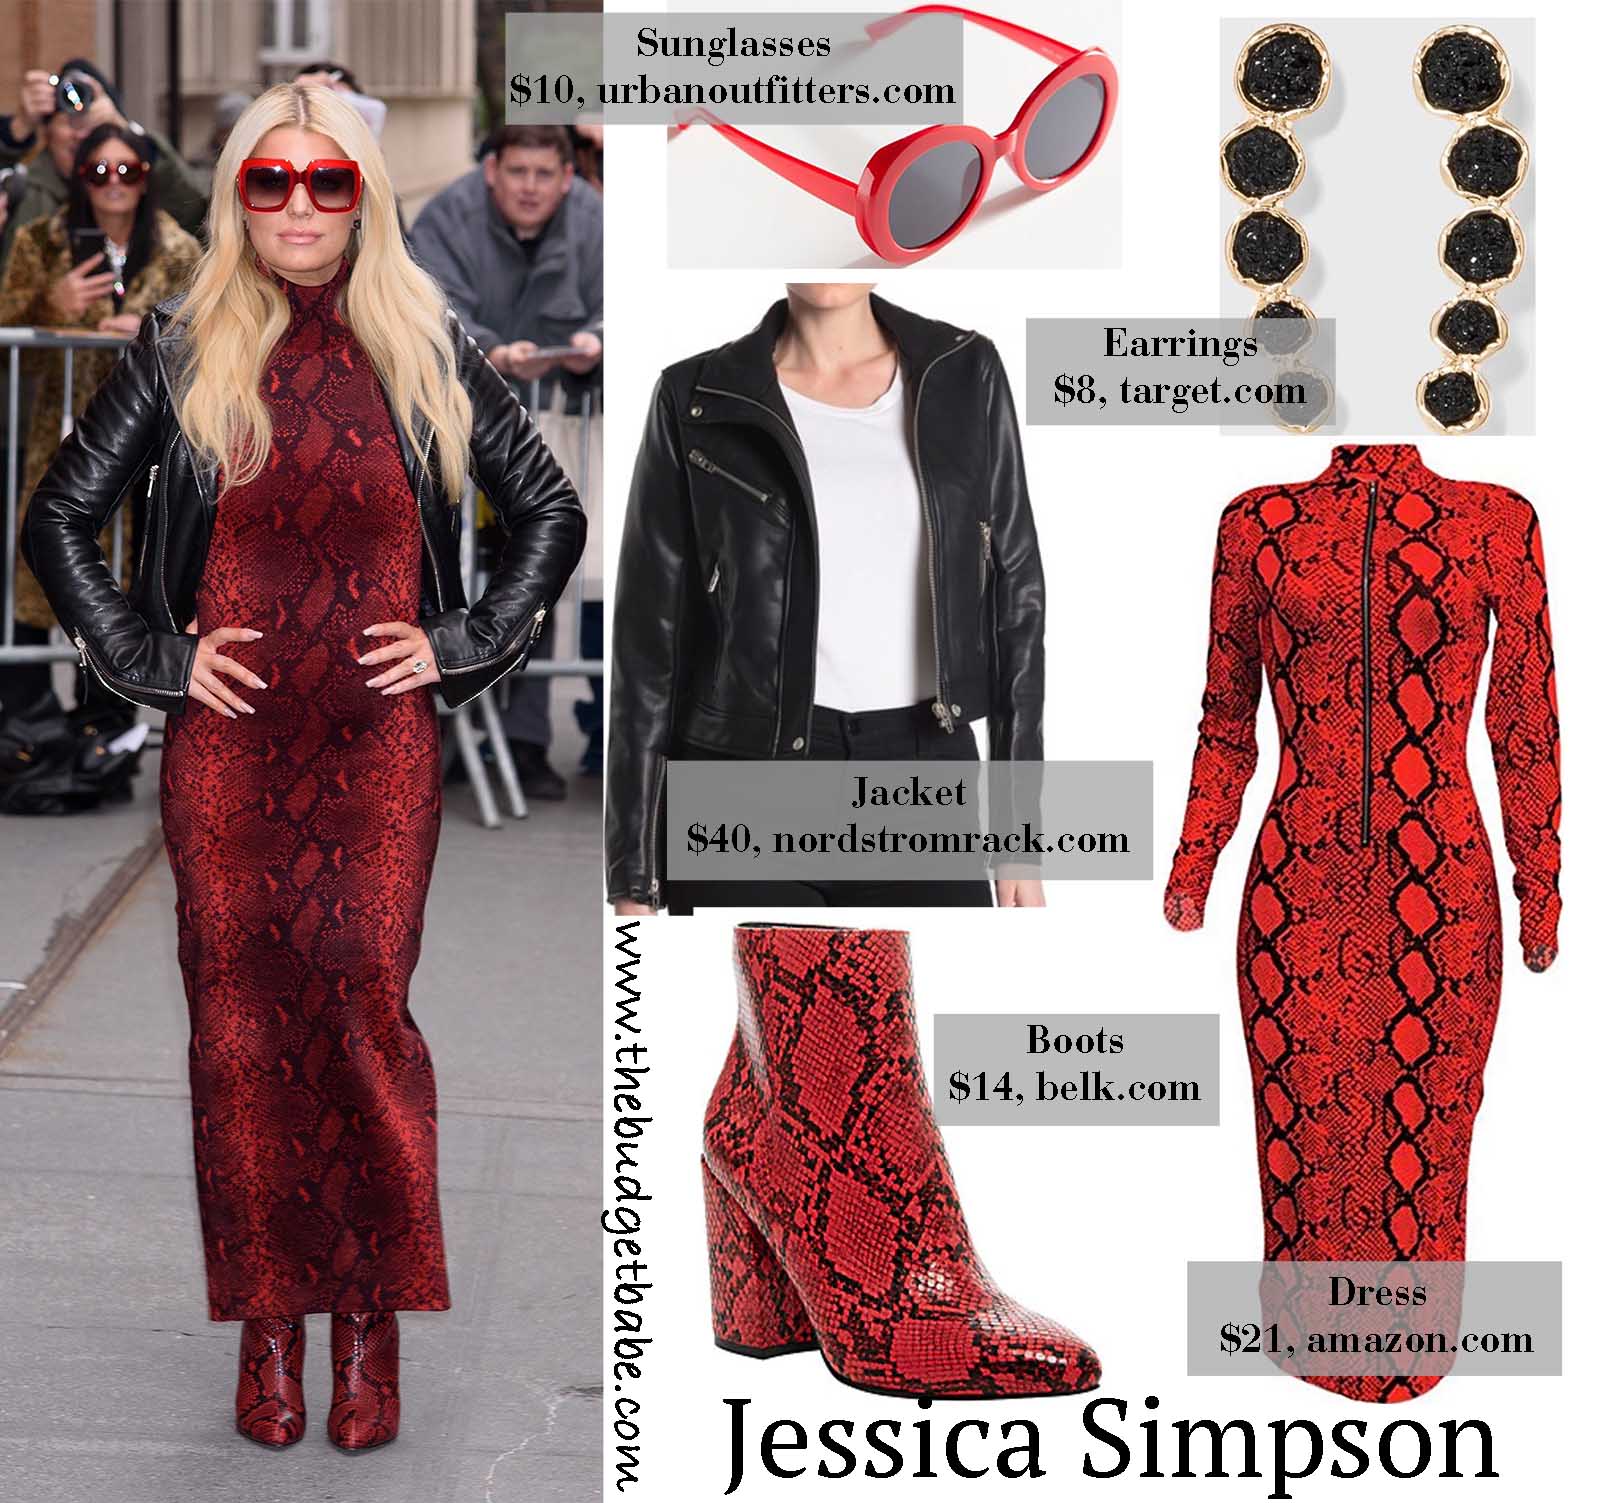 Jessica Simpson stuns in sultry snake print!